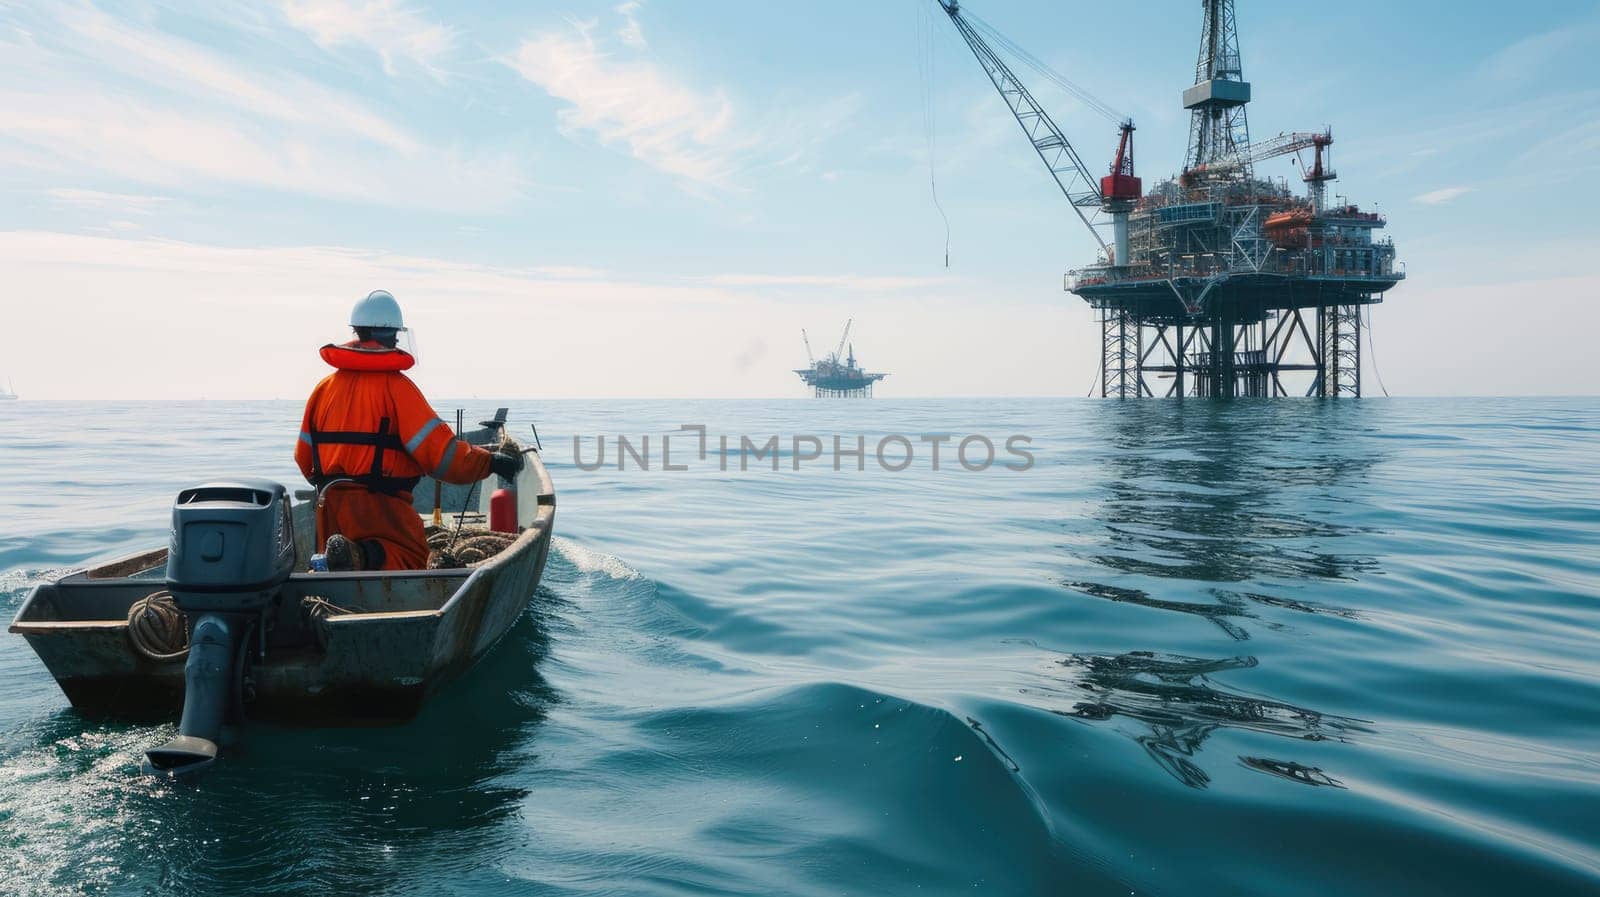 Man near ocean oil rig, feeling wind, surrounded by water, sky, and clouds. AIG41 by biancoblue